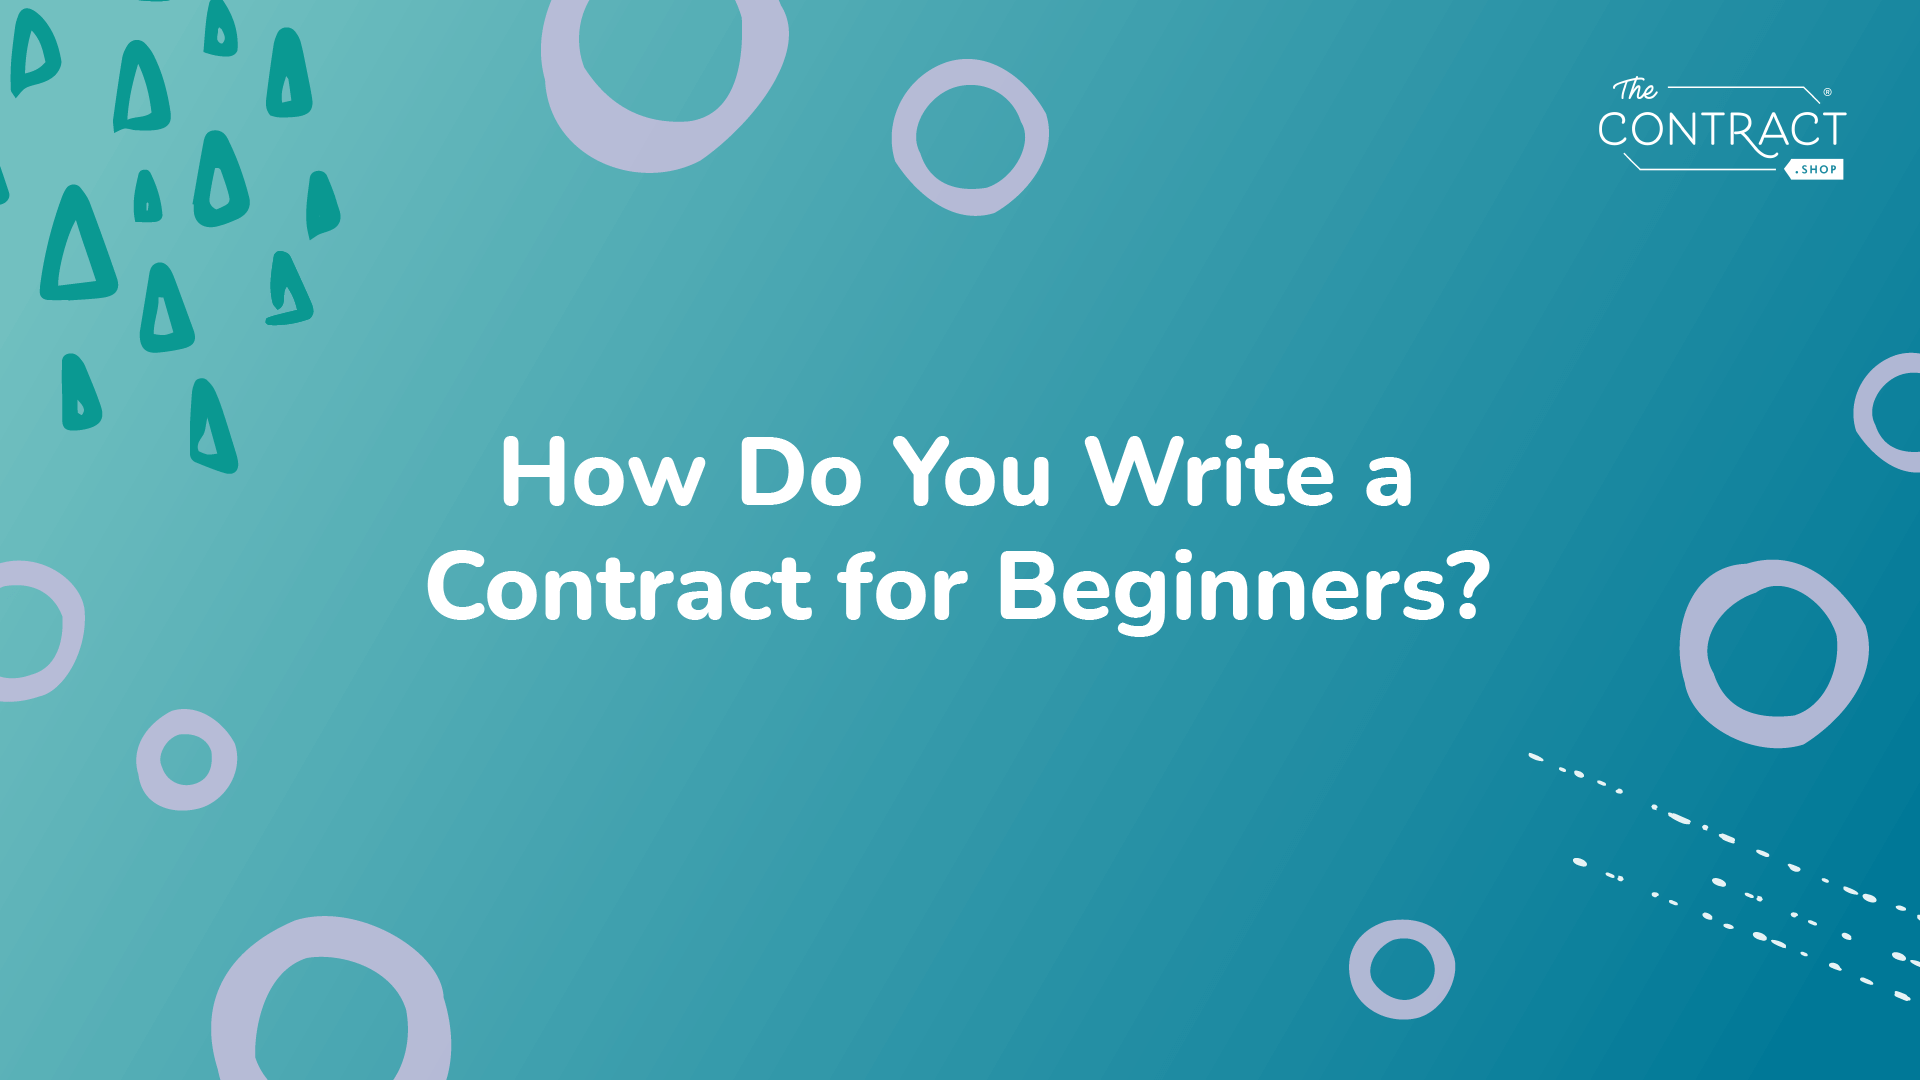 How Do You Write a Contract for Beginners?